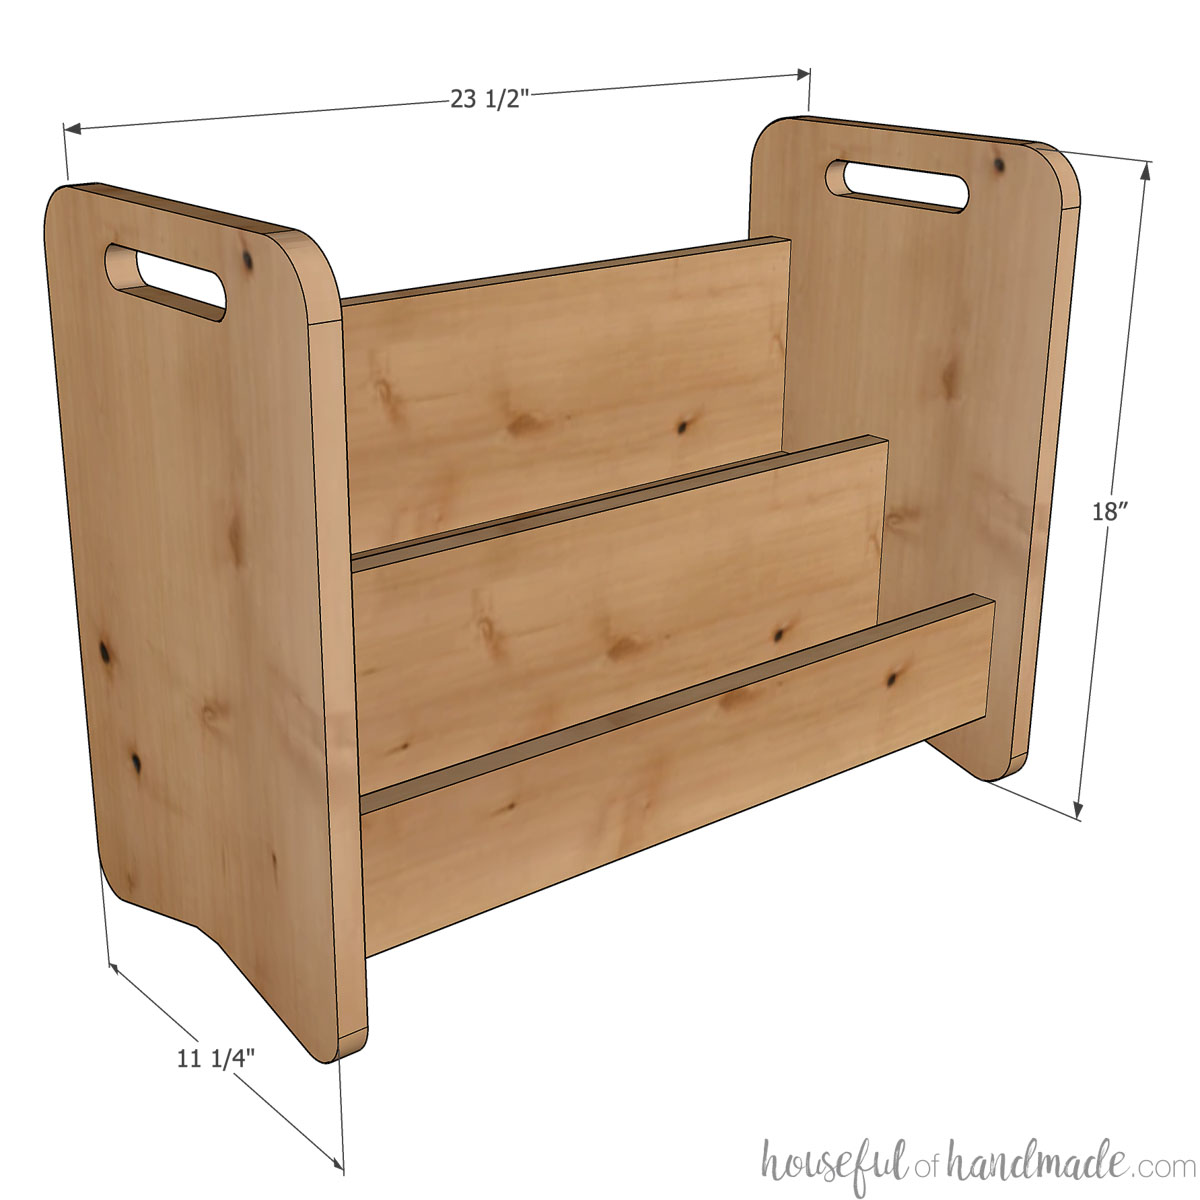 3S sketch of the toddler bookcase build plans with final dimensions noted. 